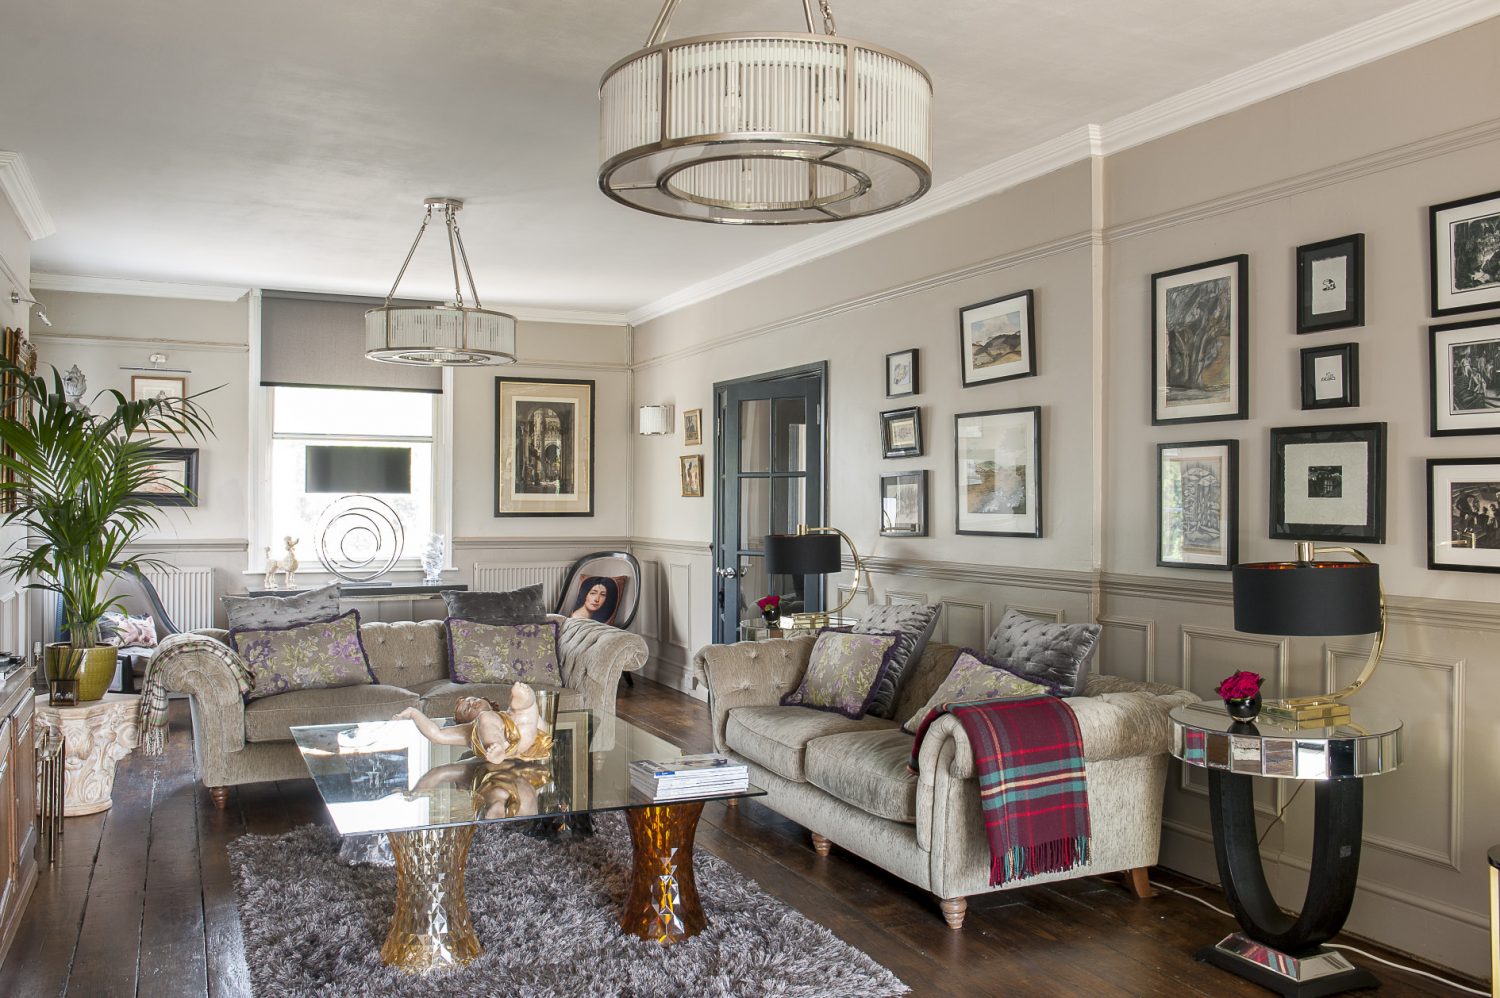 The drawing room contains matching French Deco wall and ceiling lights from WBR Interiors, a favourite shop on Wandsworth Bridge Road. Underneath is a coffee table constructed from a sheet of glass atop four Kartell Stone stools